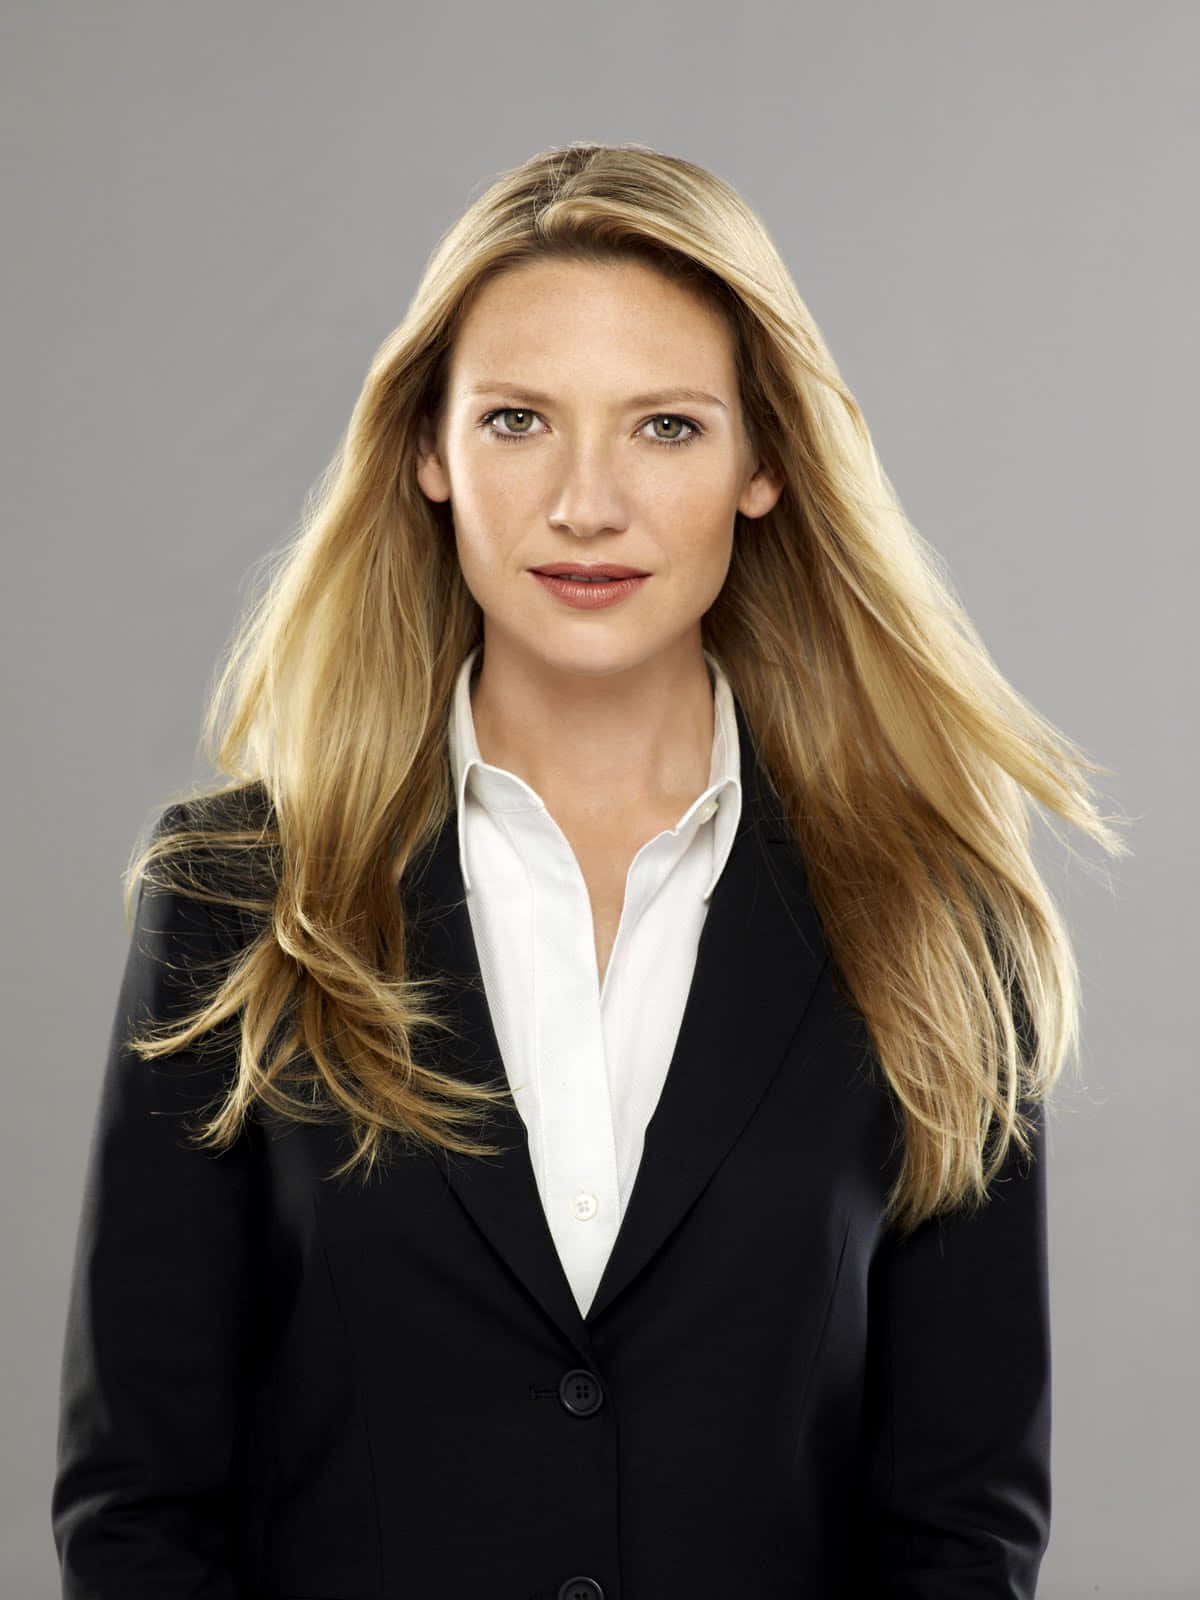 Anna Torv Striking A Graceful Pose In An Alluring Black Outfit Background